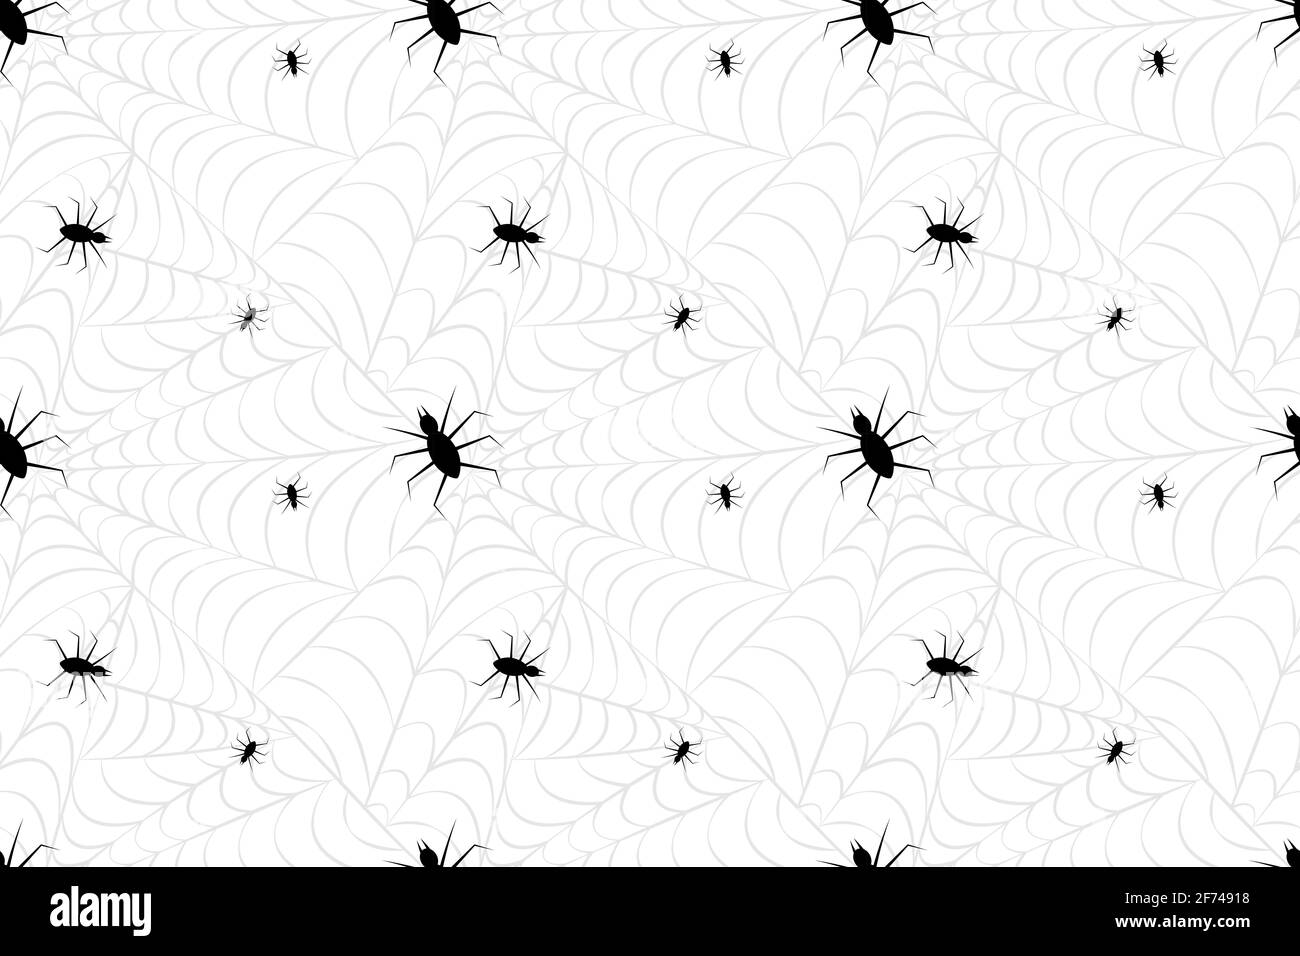 White spider web seamless pattern. Stock Vector